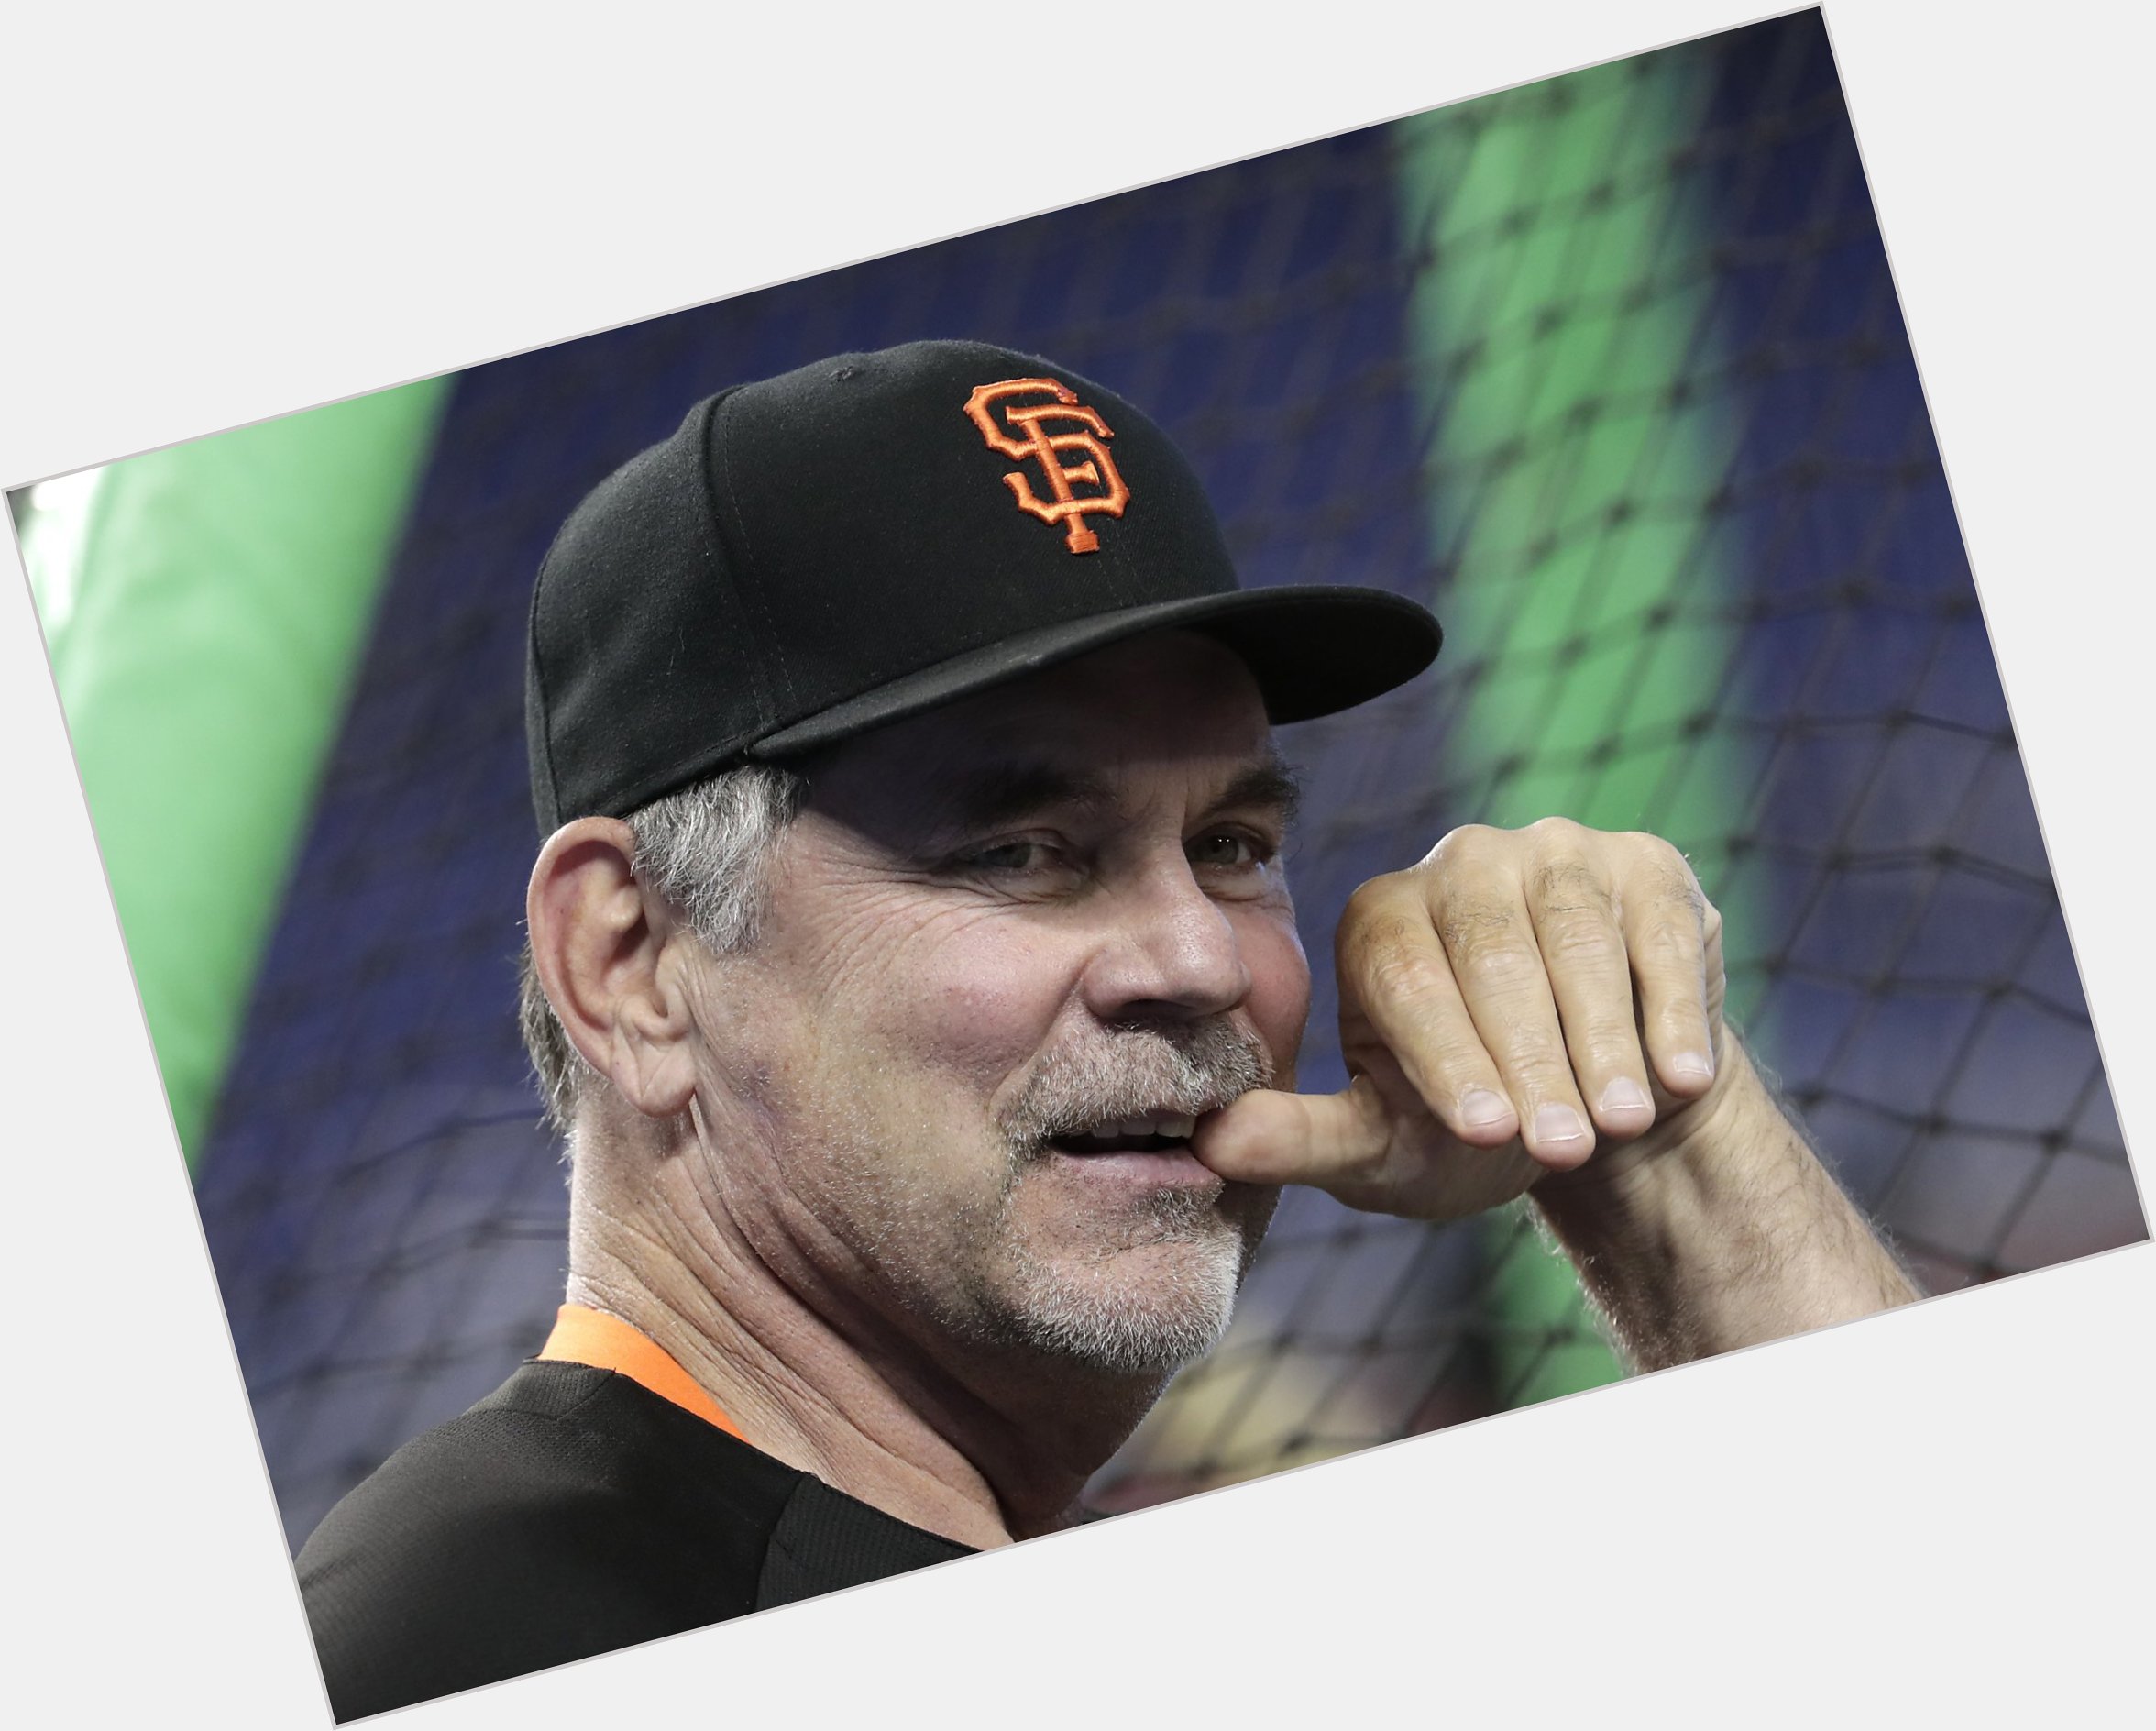 <a href="/hot-men/bruce-bochy/is-he-married-where">Bruce Bochy</a>  